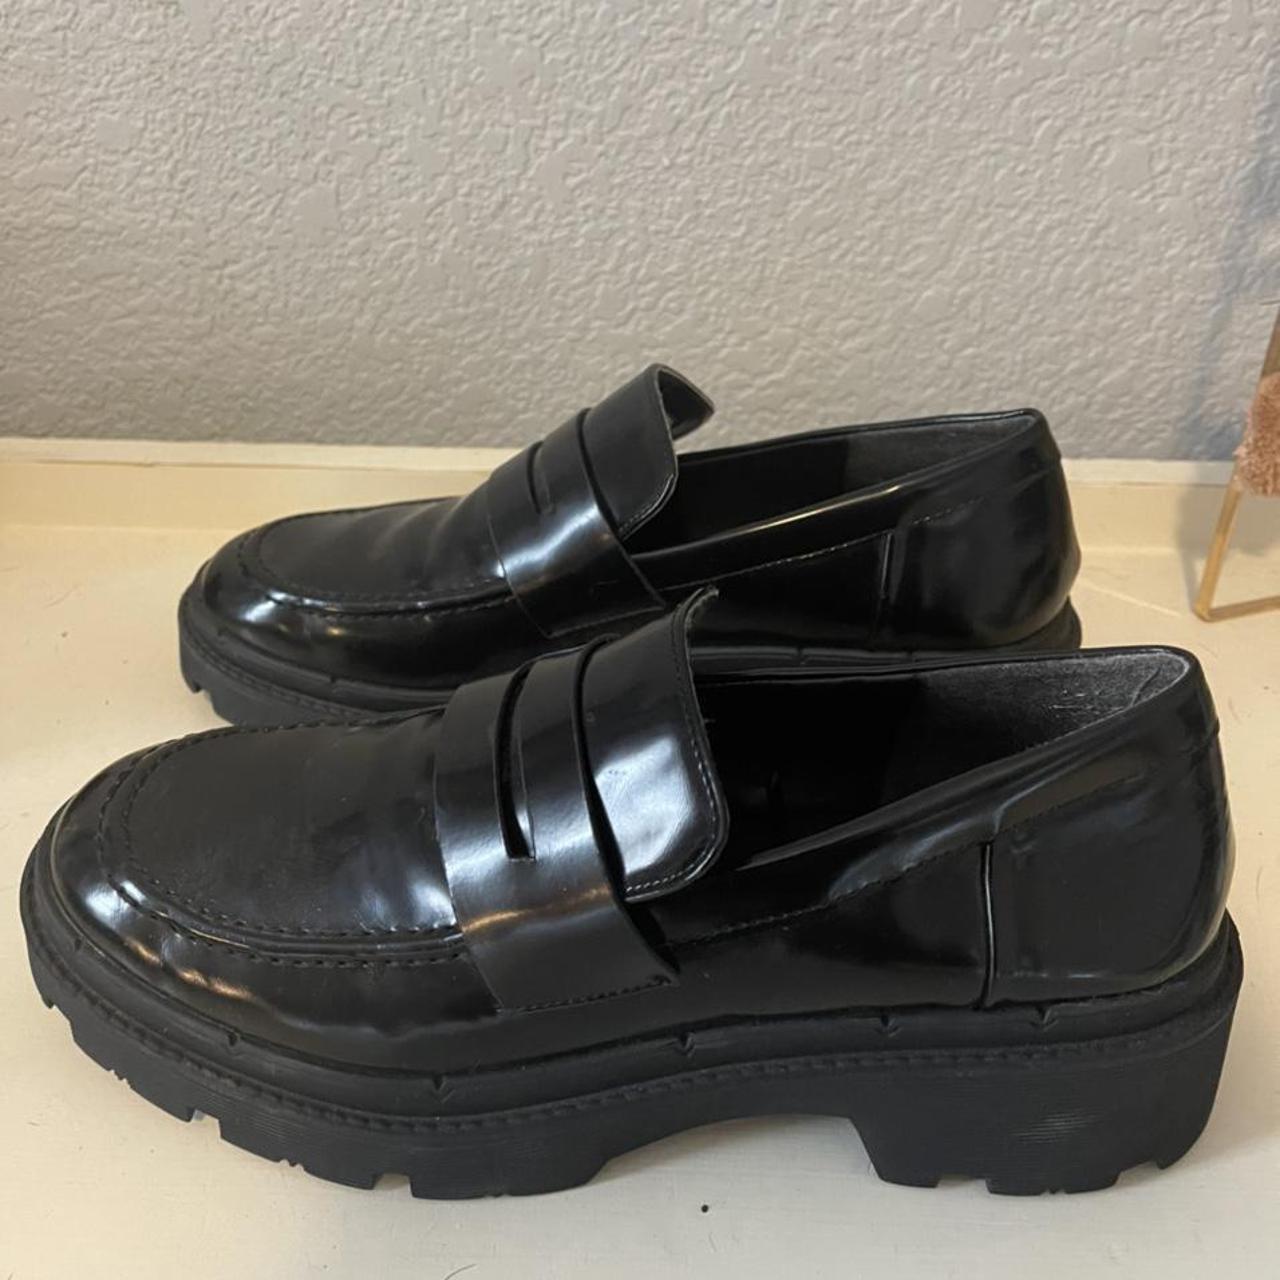 Black chunky loafers, great condition & worn once - Depop